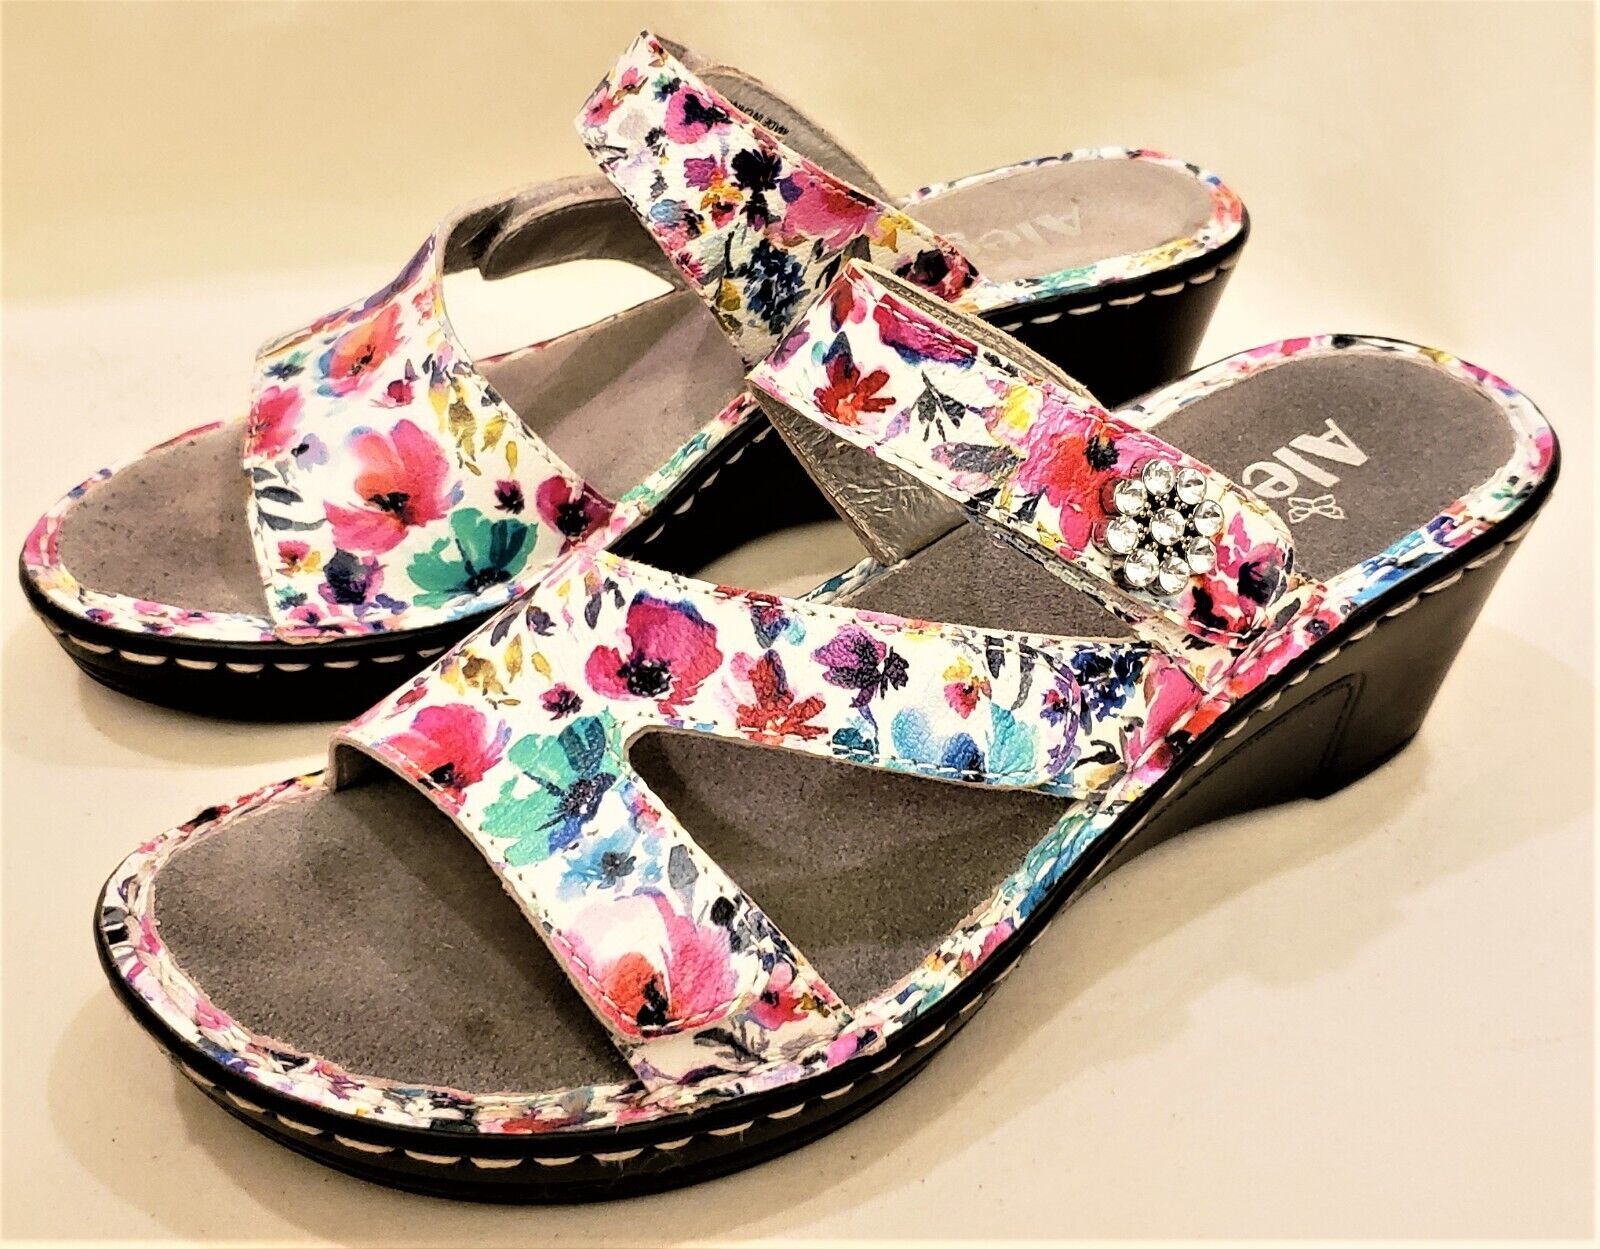 Primary image for Alegria Wedge Heels Comfort Sandals/Shoes Size-8-8.5 Floral Print Leather